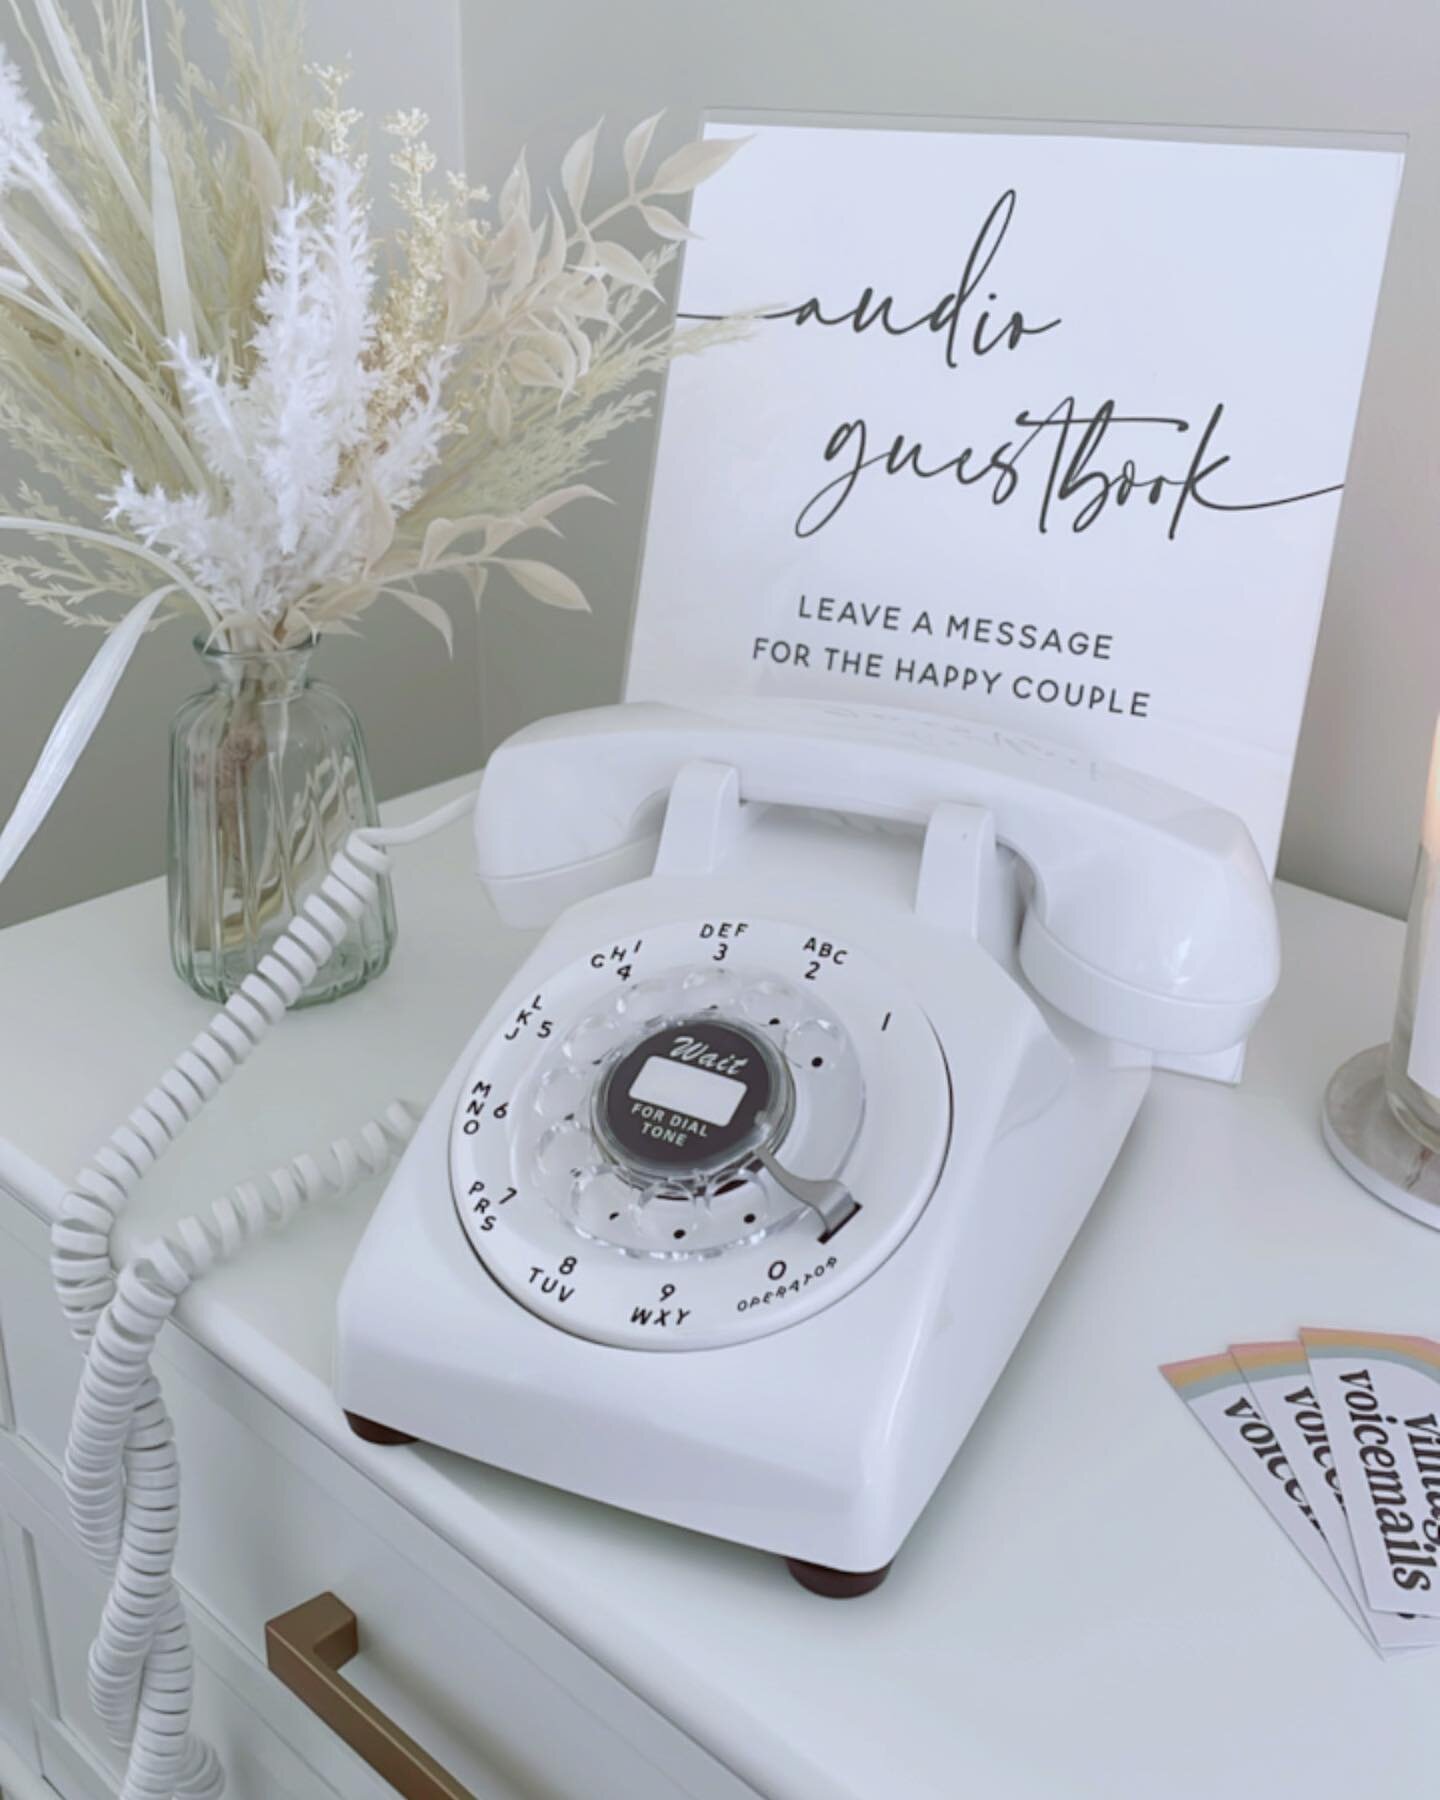 Did you know&hellip; 

We offer the perfect add-on to any photo booth package! @vintagevoicemails &mdash; an audio guest book service. 📞✨

Ditch the traditional pen + paper guest book and receive audio messages from your guests in a stylish way. We 